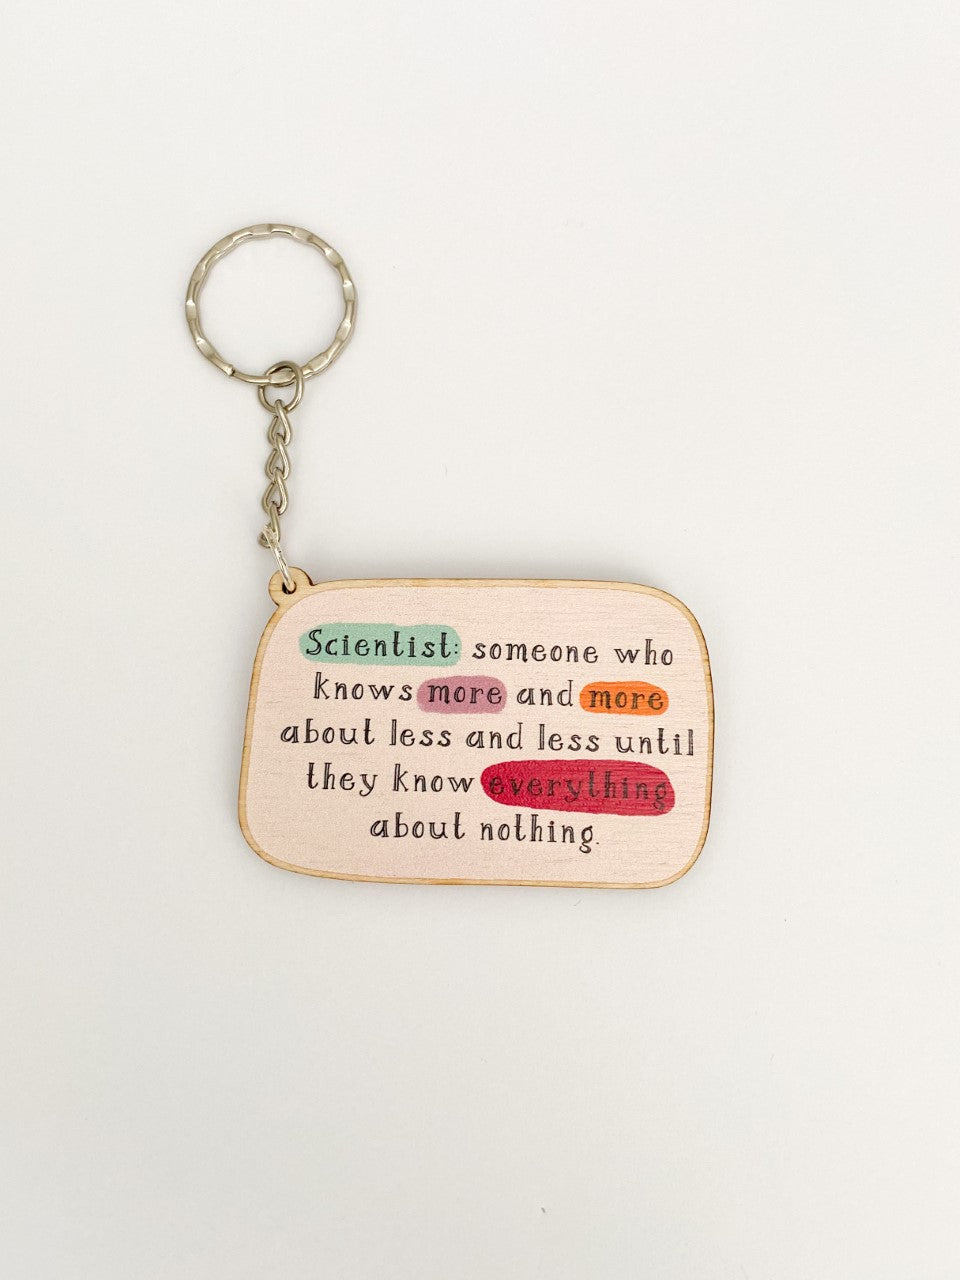 Keyring reads 'Scientist: someone who knows more and more about less and less until they know everything about nothing'. Words 'scientist', 'more' and 'everything' are highlighted. A small chain leads to a keyring attachment.